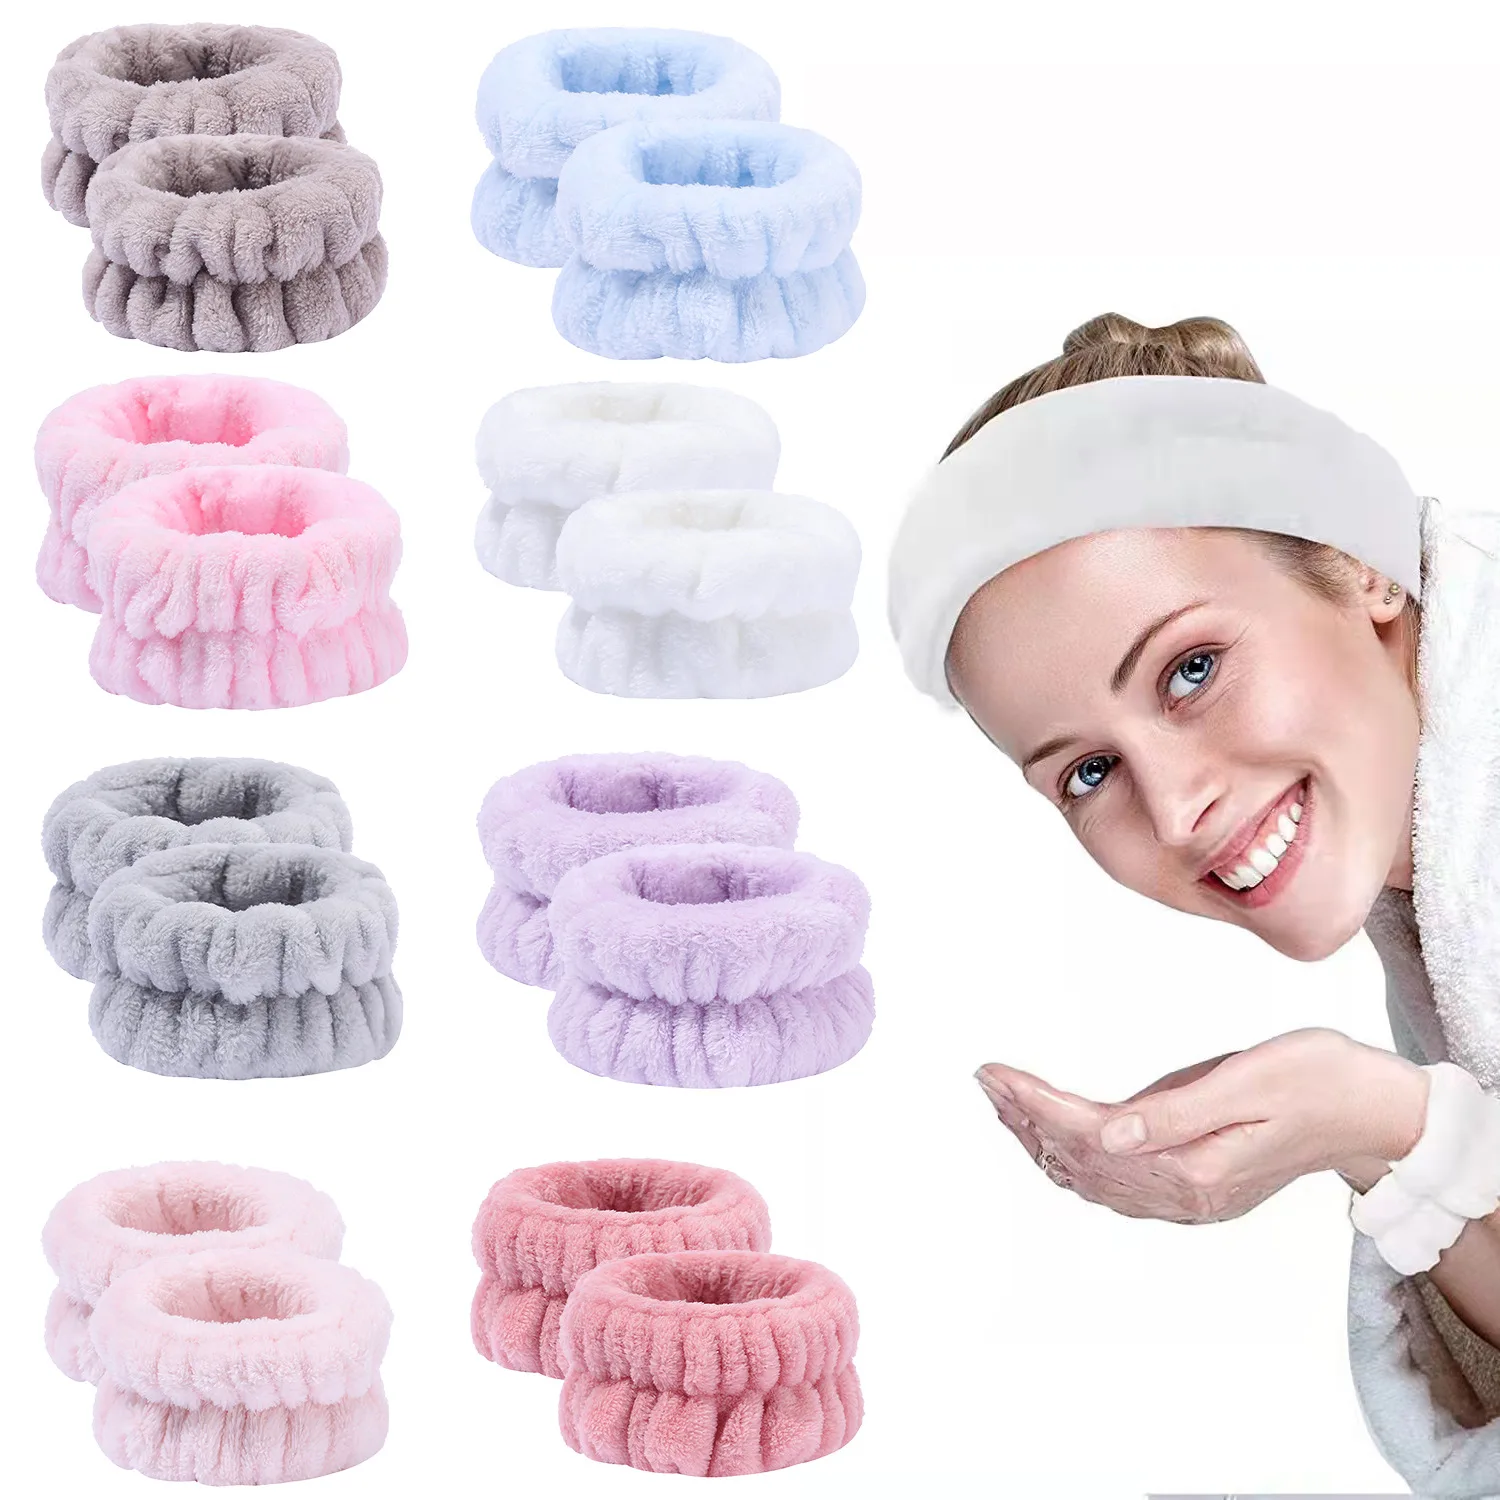 

Washing Face Wrist Spa Washband Microfiber Wrist Wash Absorbent Wristbands for Women Prevent Liquid From Spilling Your Arms